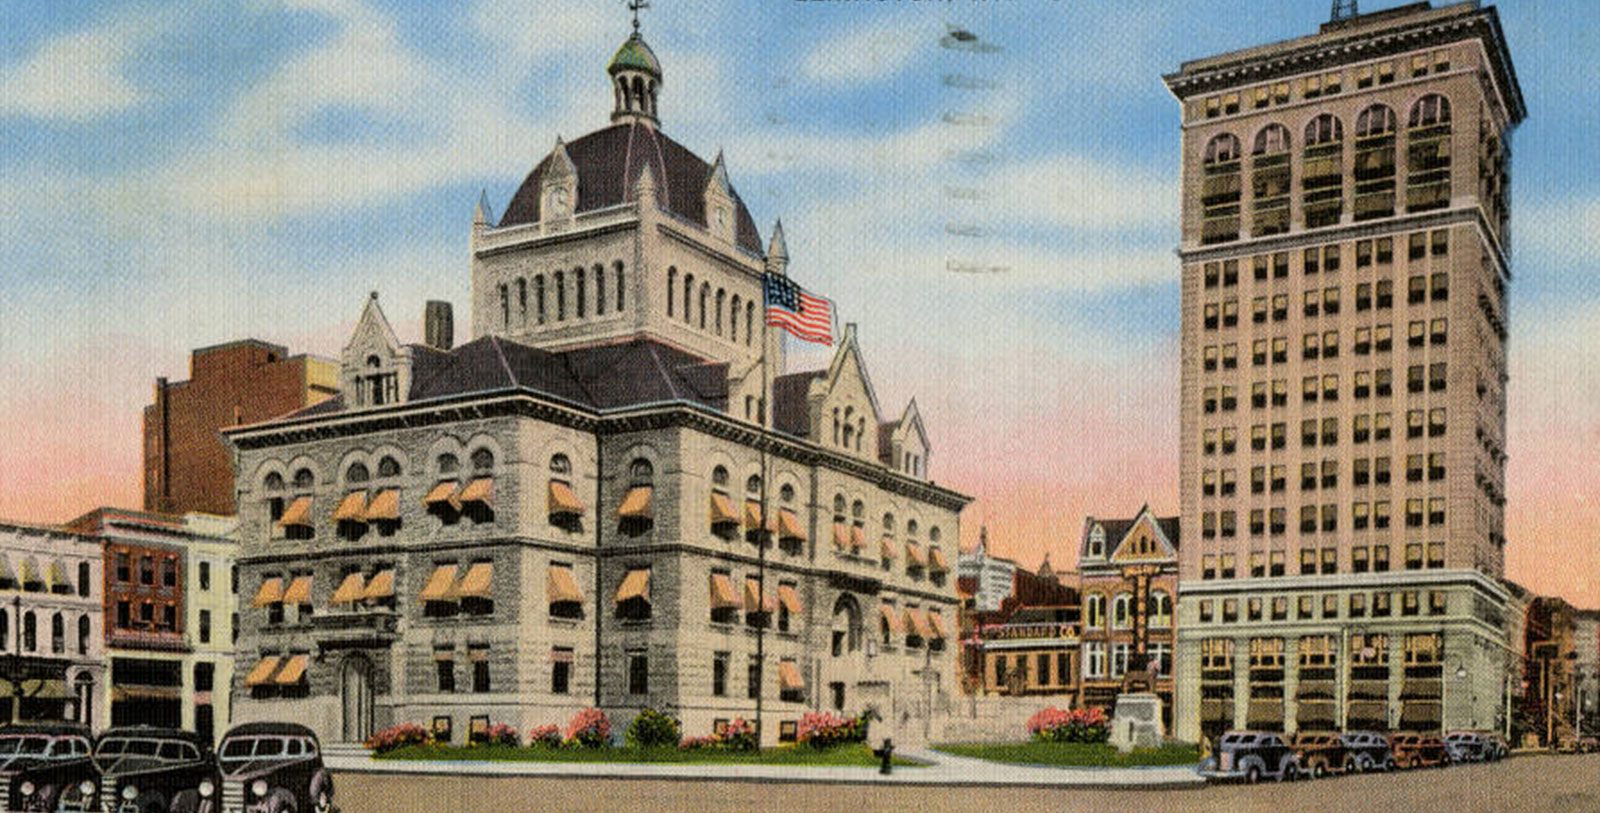 Historical Image of Exterior with Fayette County Courthouse, 21c Museum Hotel Lexington by MGallery, 1914, Member of Historic Hotels of America, in Lexington, Kentucky..